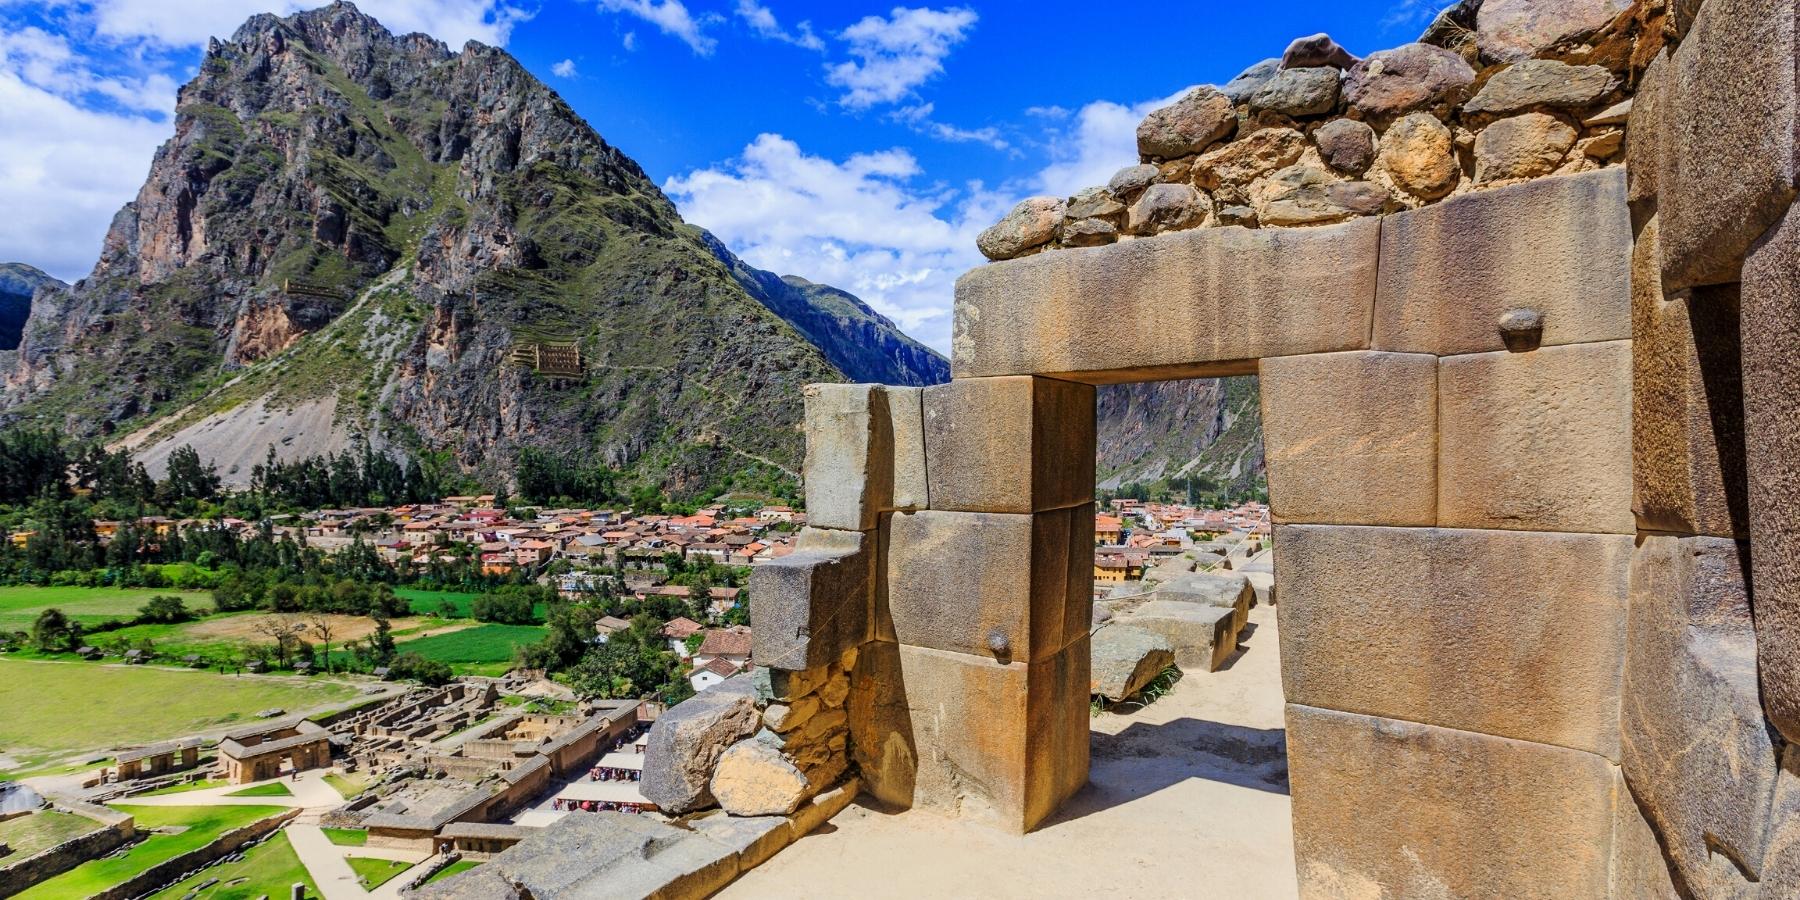 8.- HOW DIFFICULT IS THE INCA TRAIL OF 4 DAYS TO MACHU PICCHU?